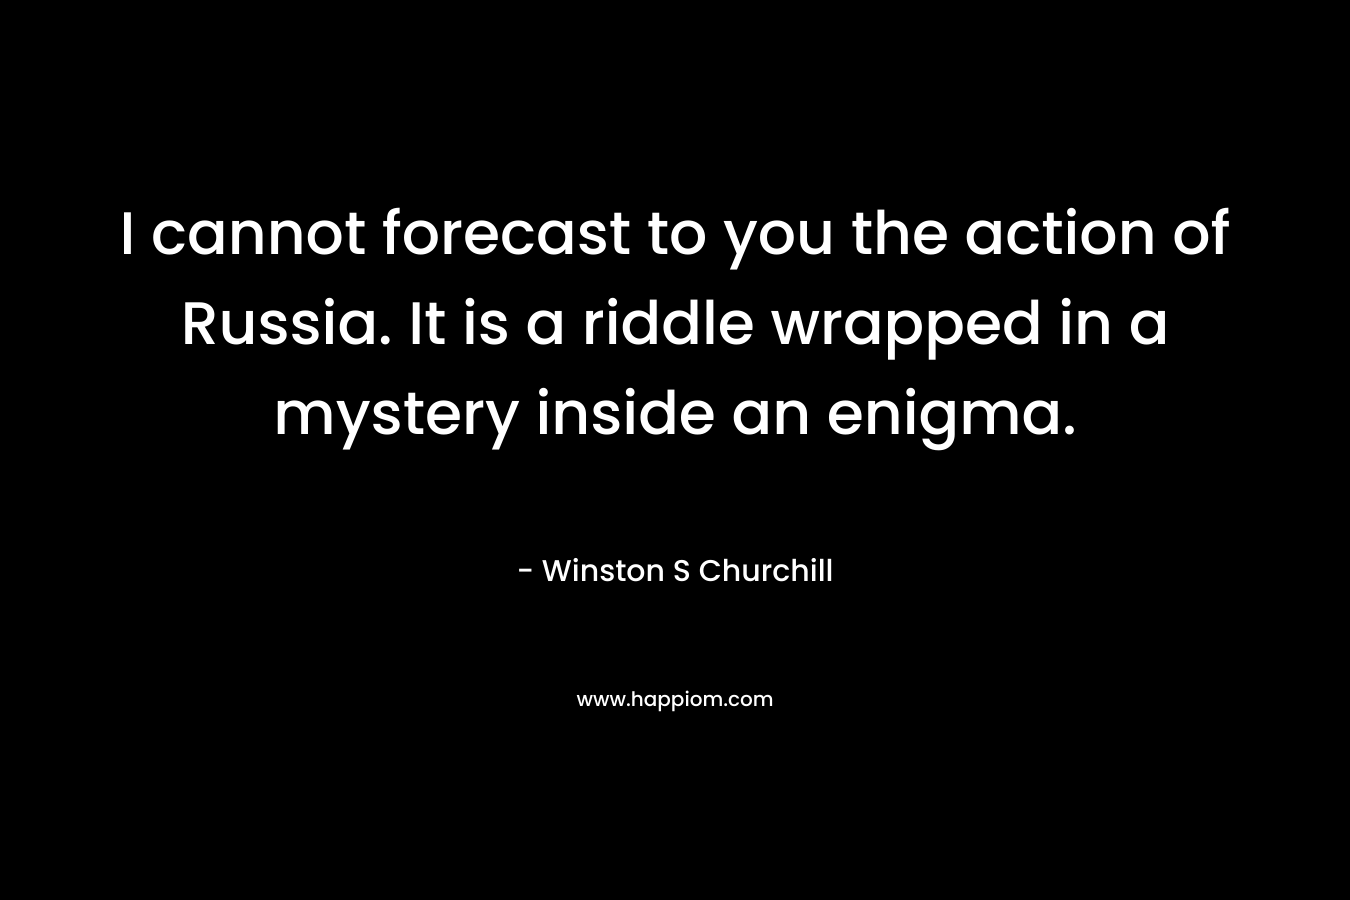 I cannot forecast to you the action of Russia. It is a riddle wrapped in a mystery inside an enigma.